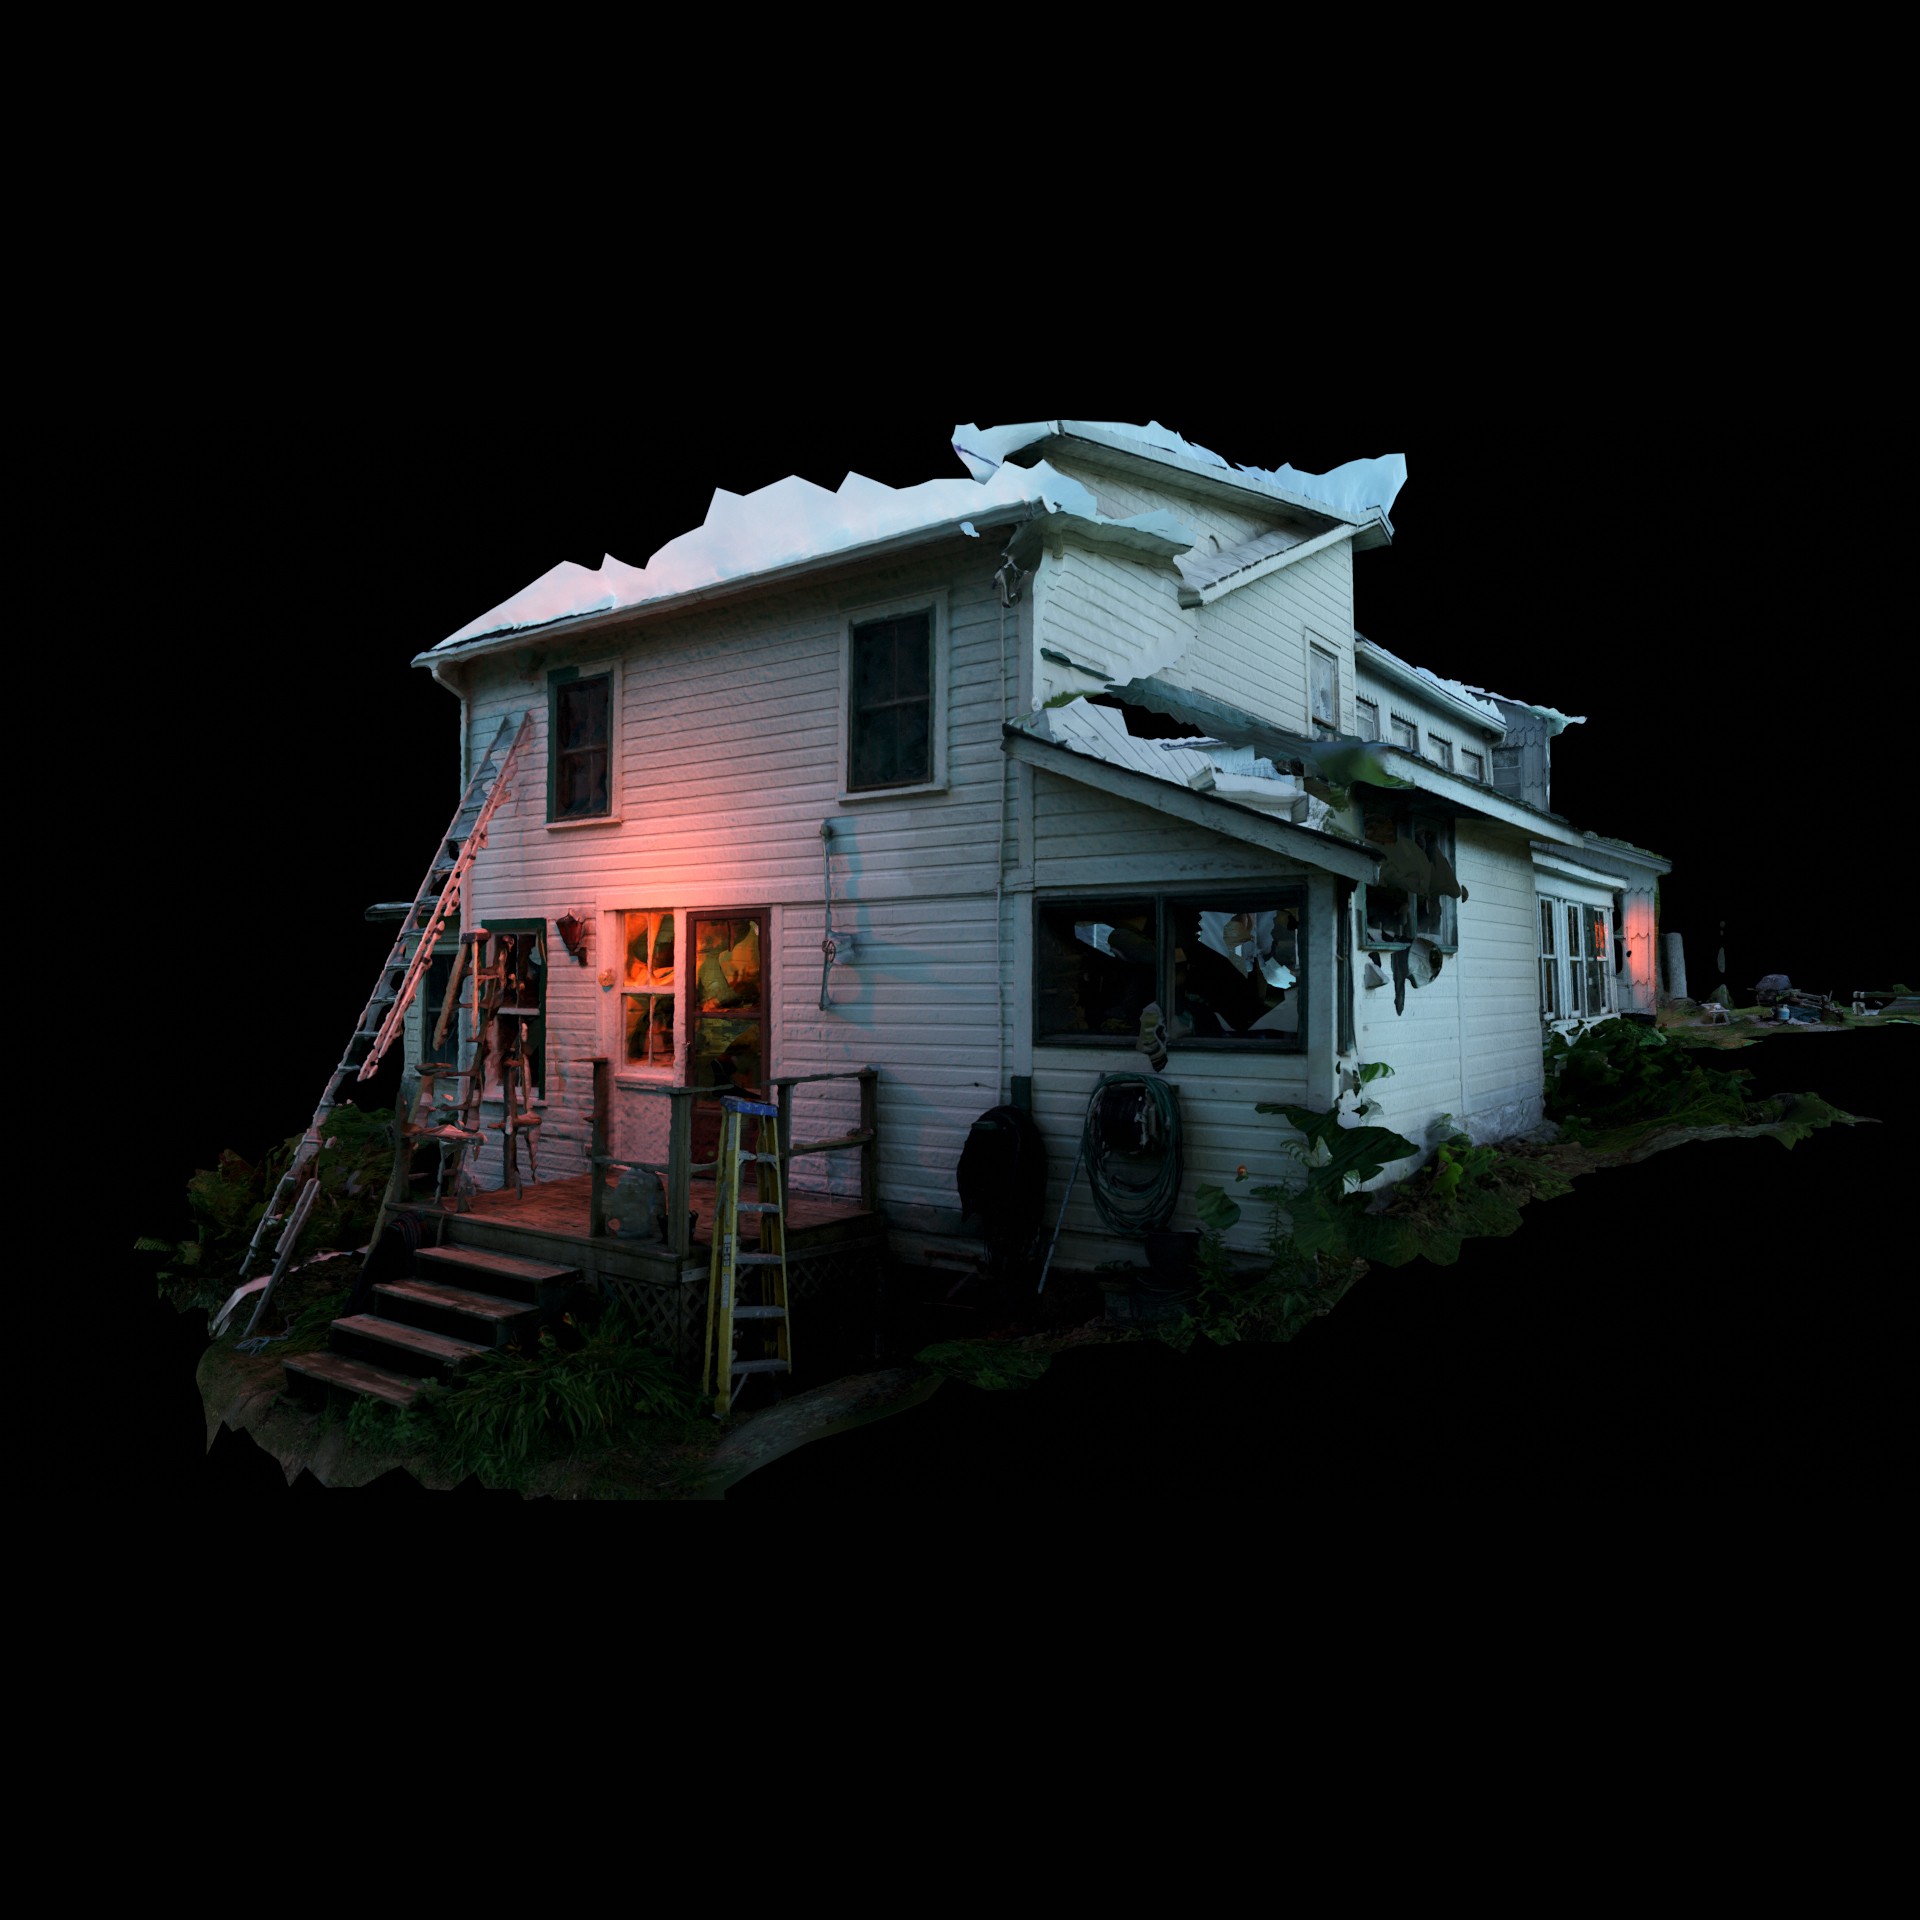 Image displays a cut out house on a black background.